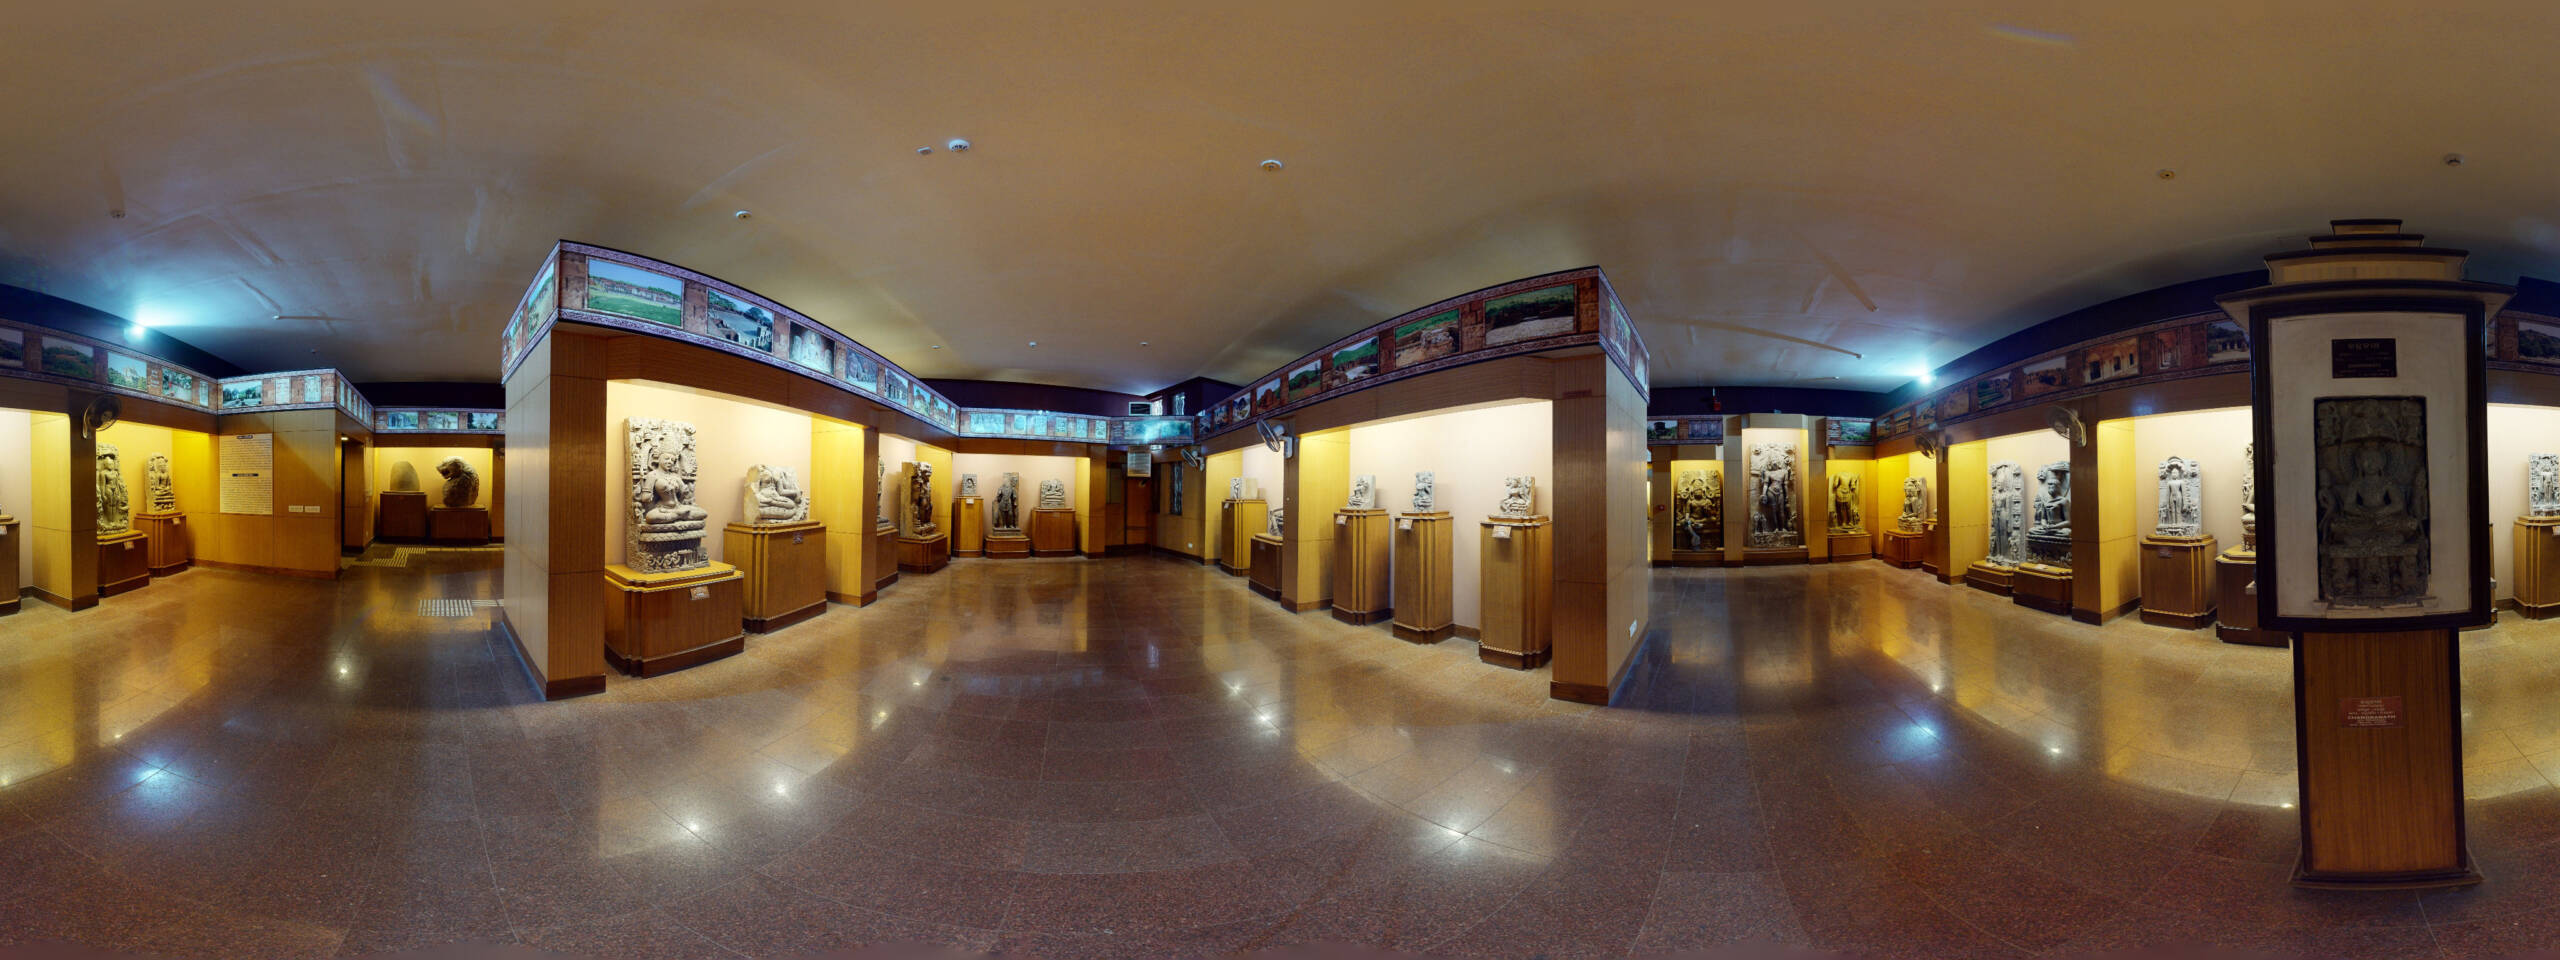 360 degree view of Archaeology gallery of Odisha State Museum